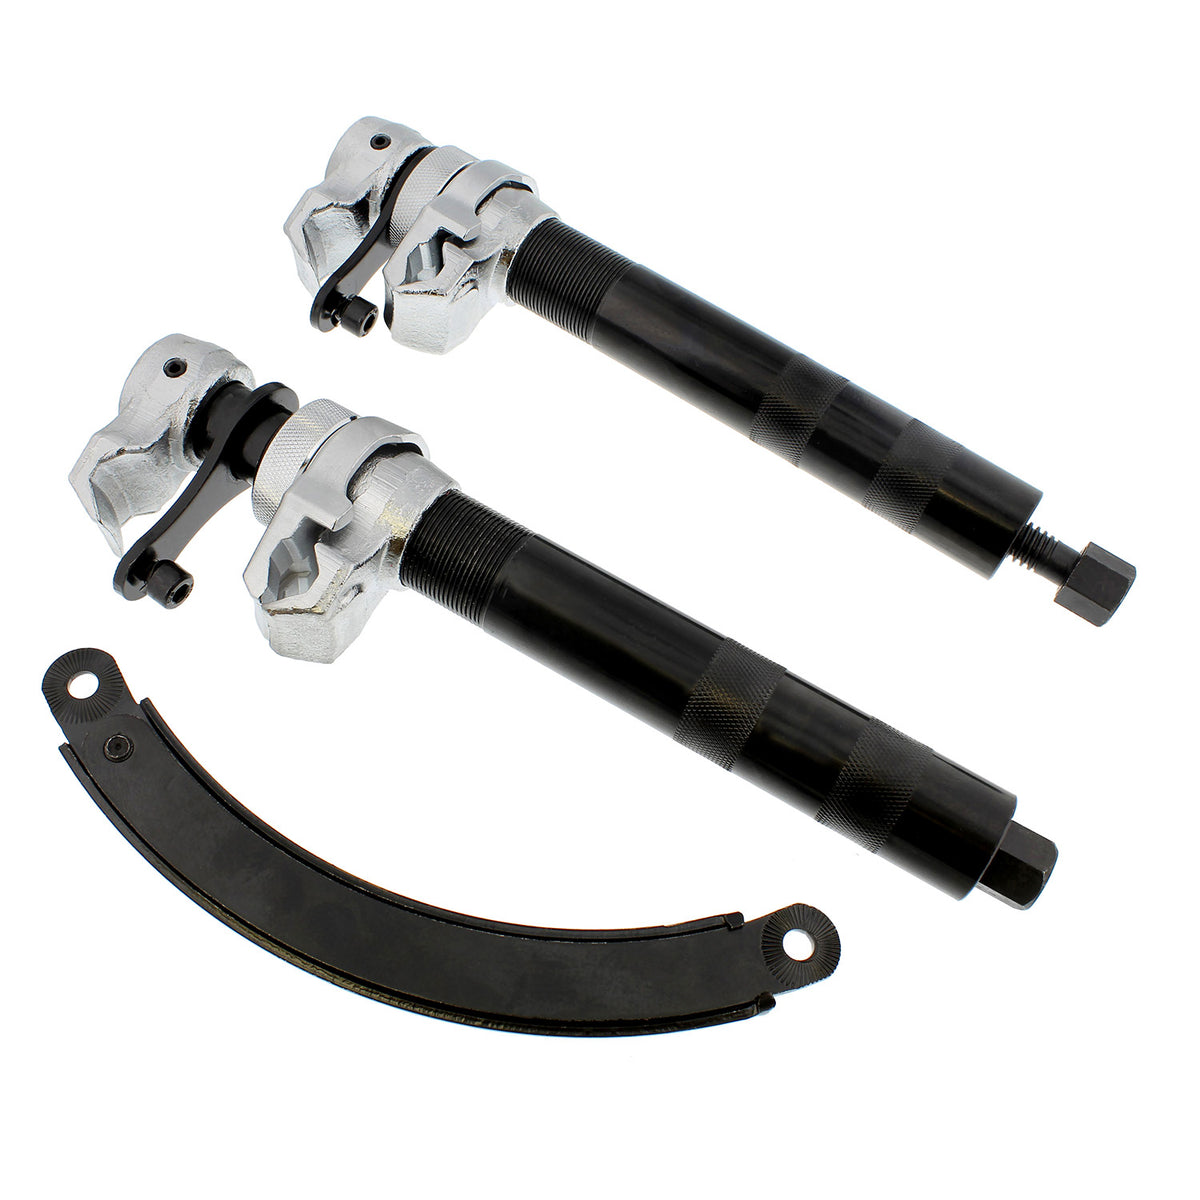 Coil Spring Compression Tools - 2pc Coil Spring Clamps & Safety Guard